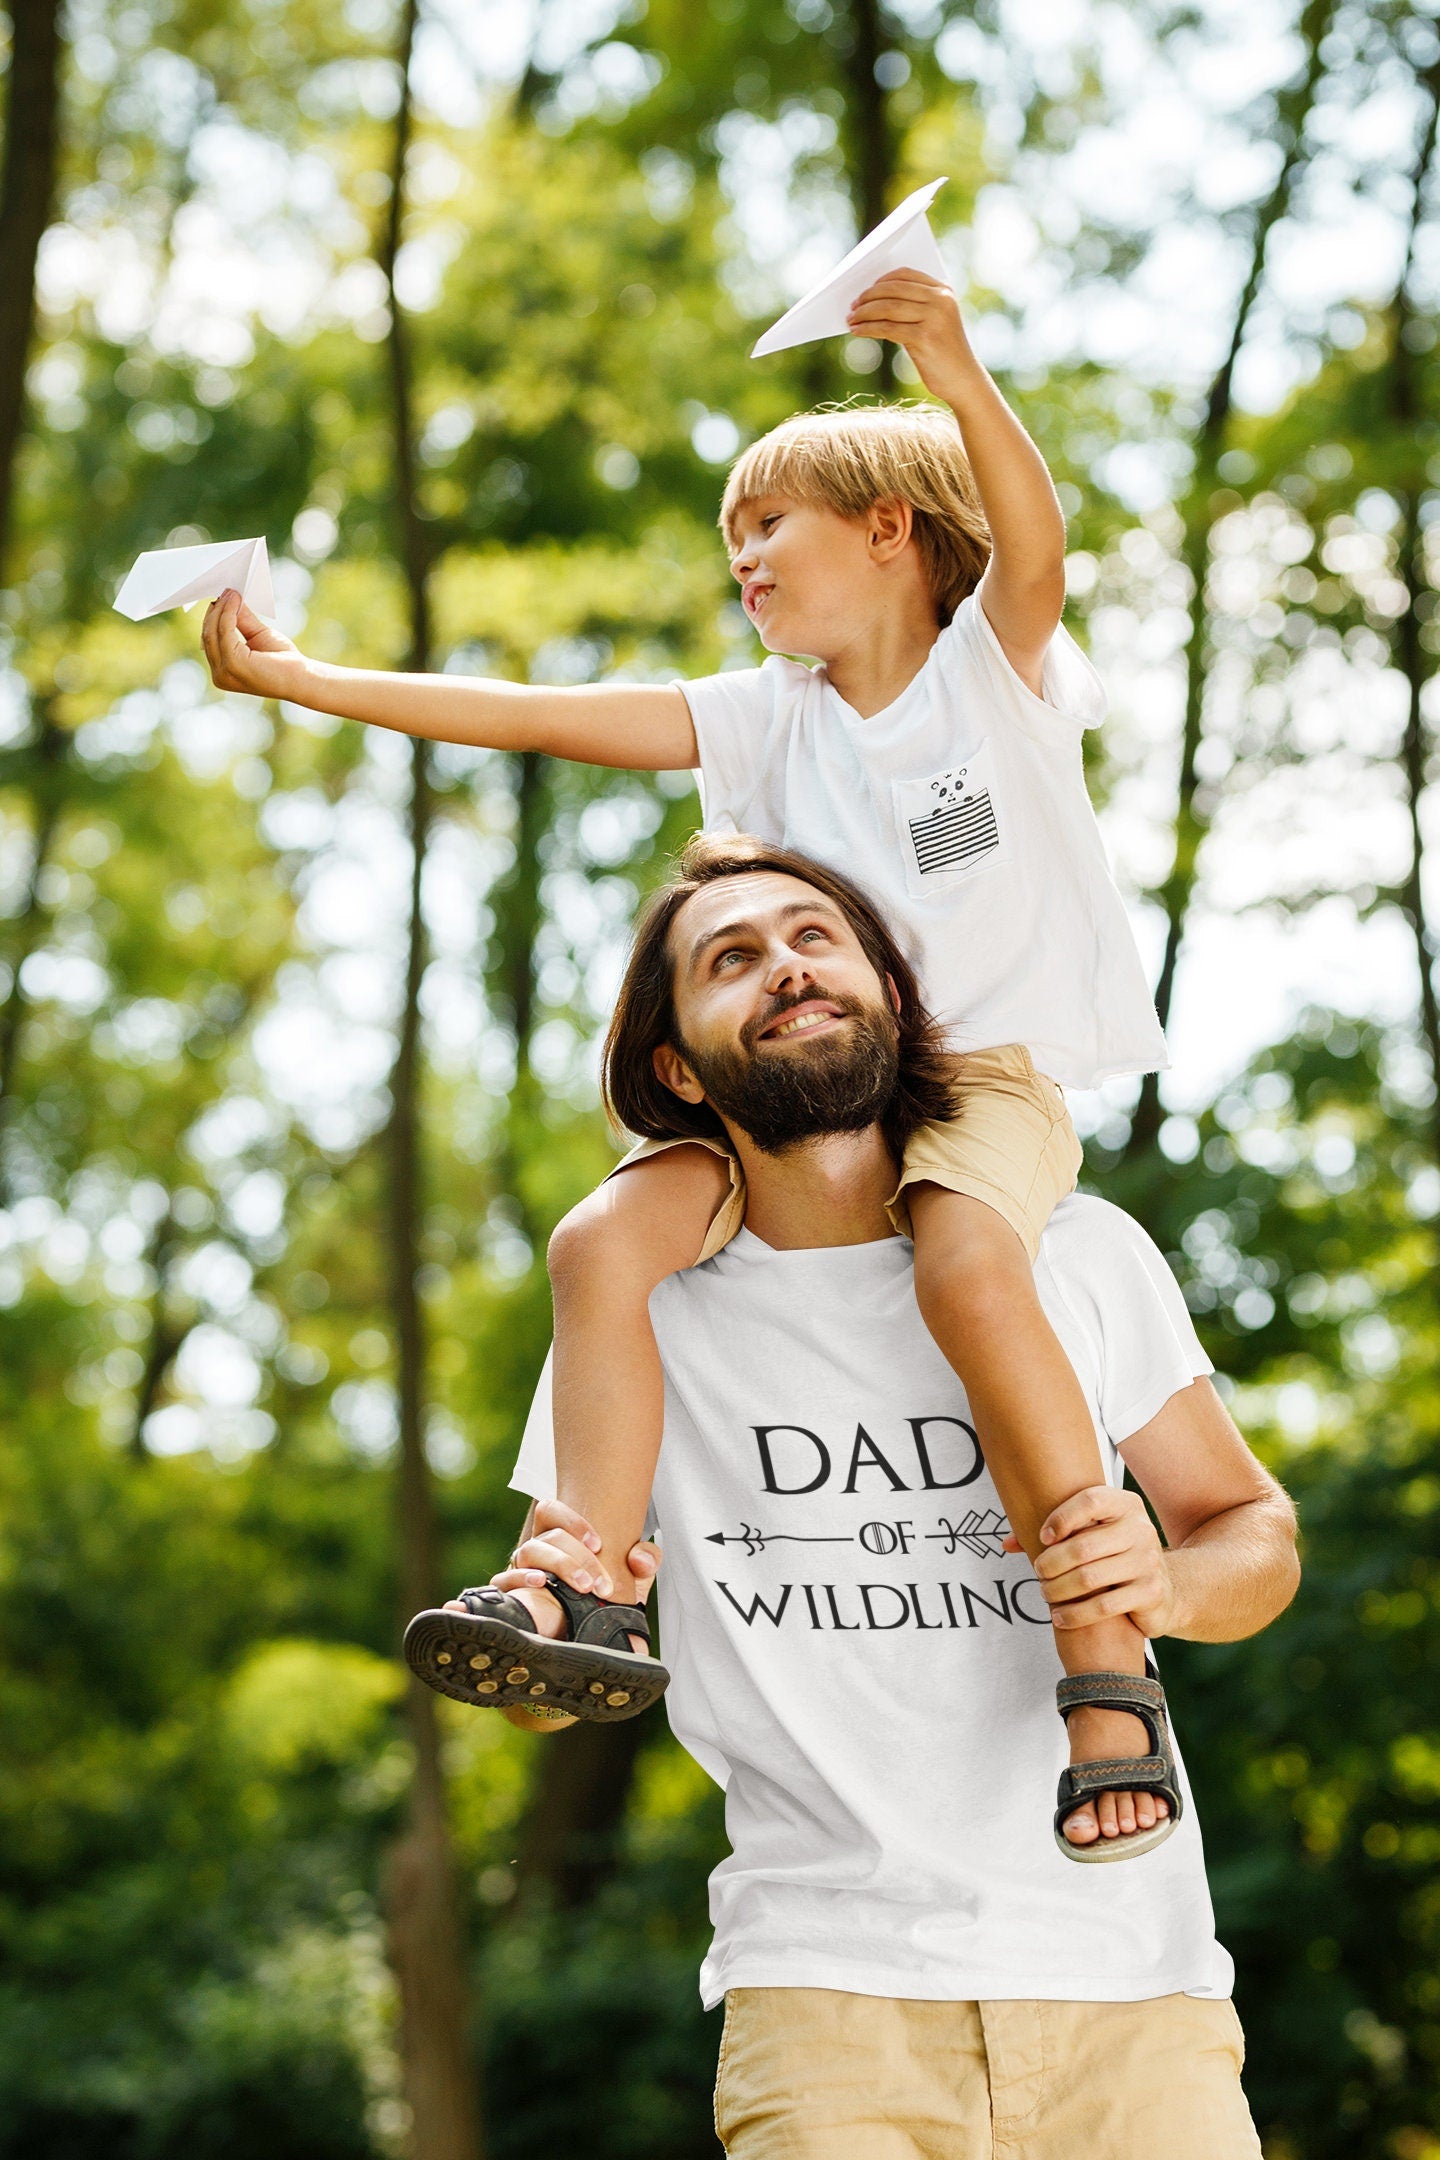 Dad of Wildlings - Game of Throne inspired Father's Day shirt